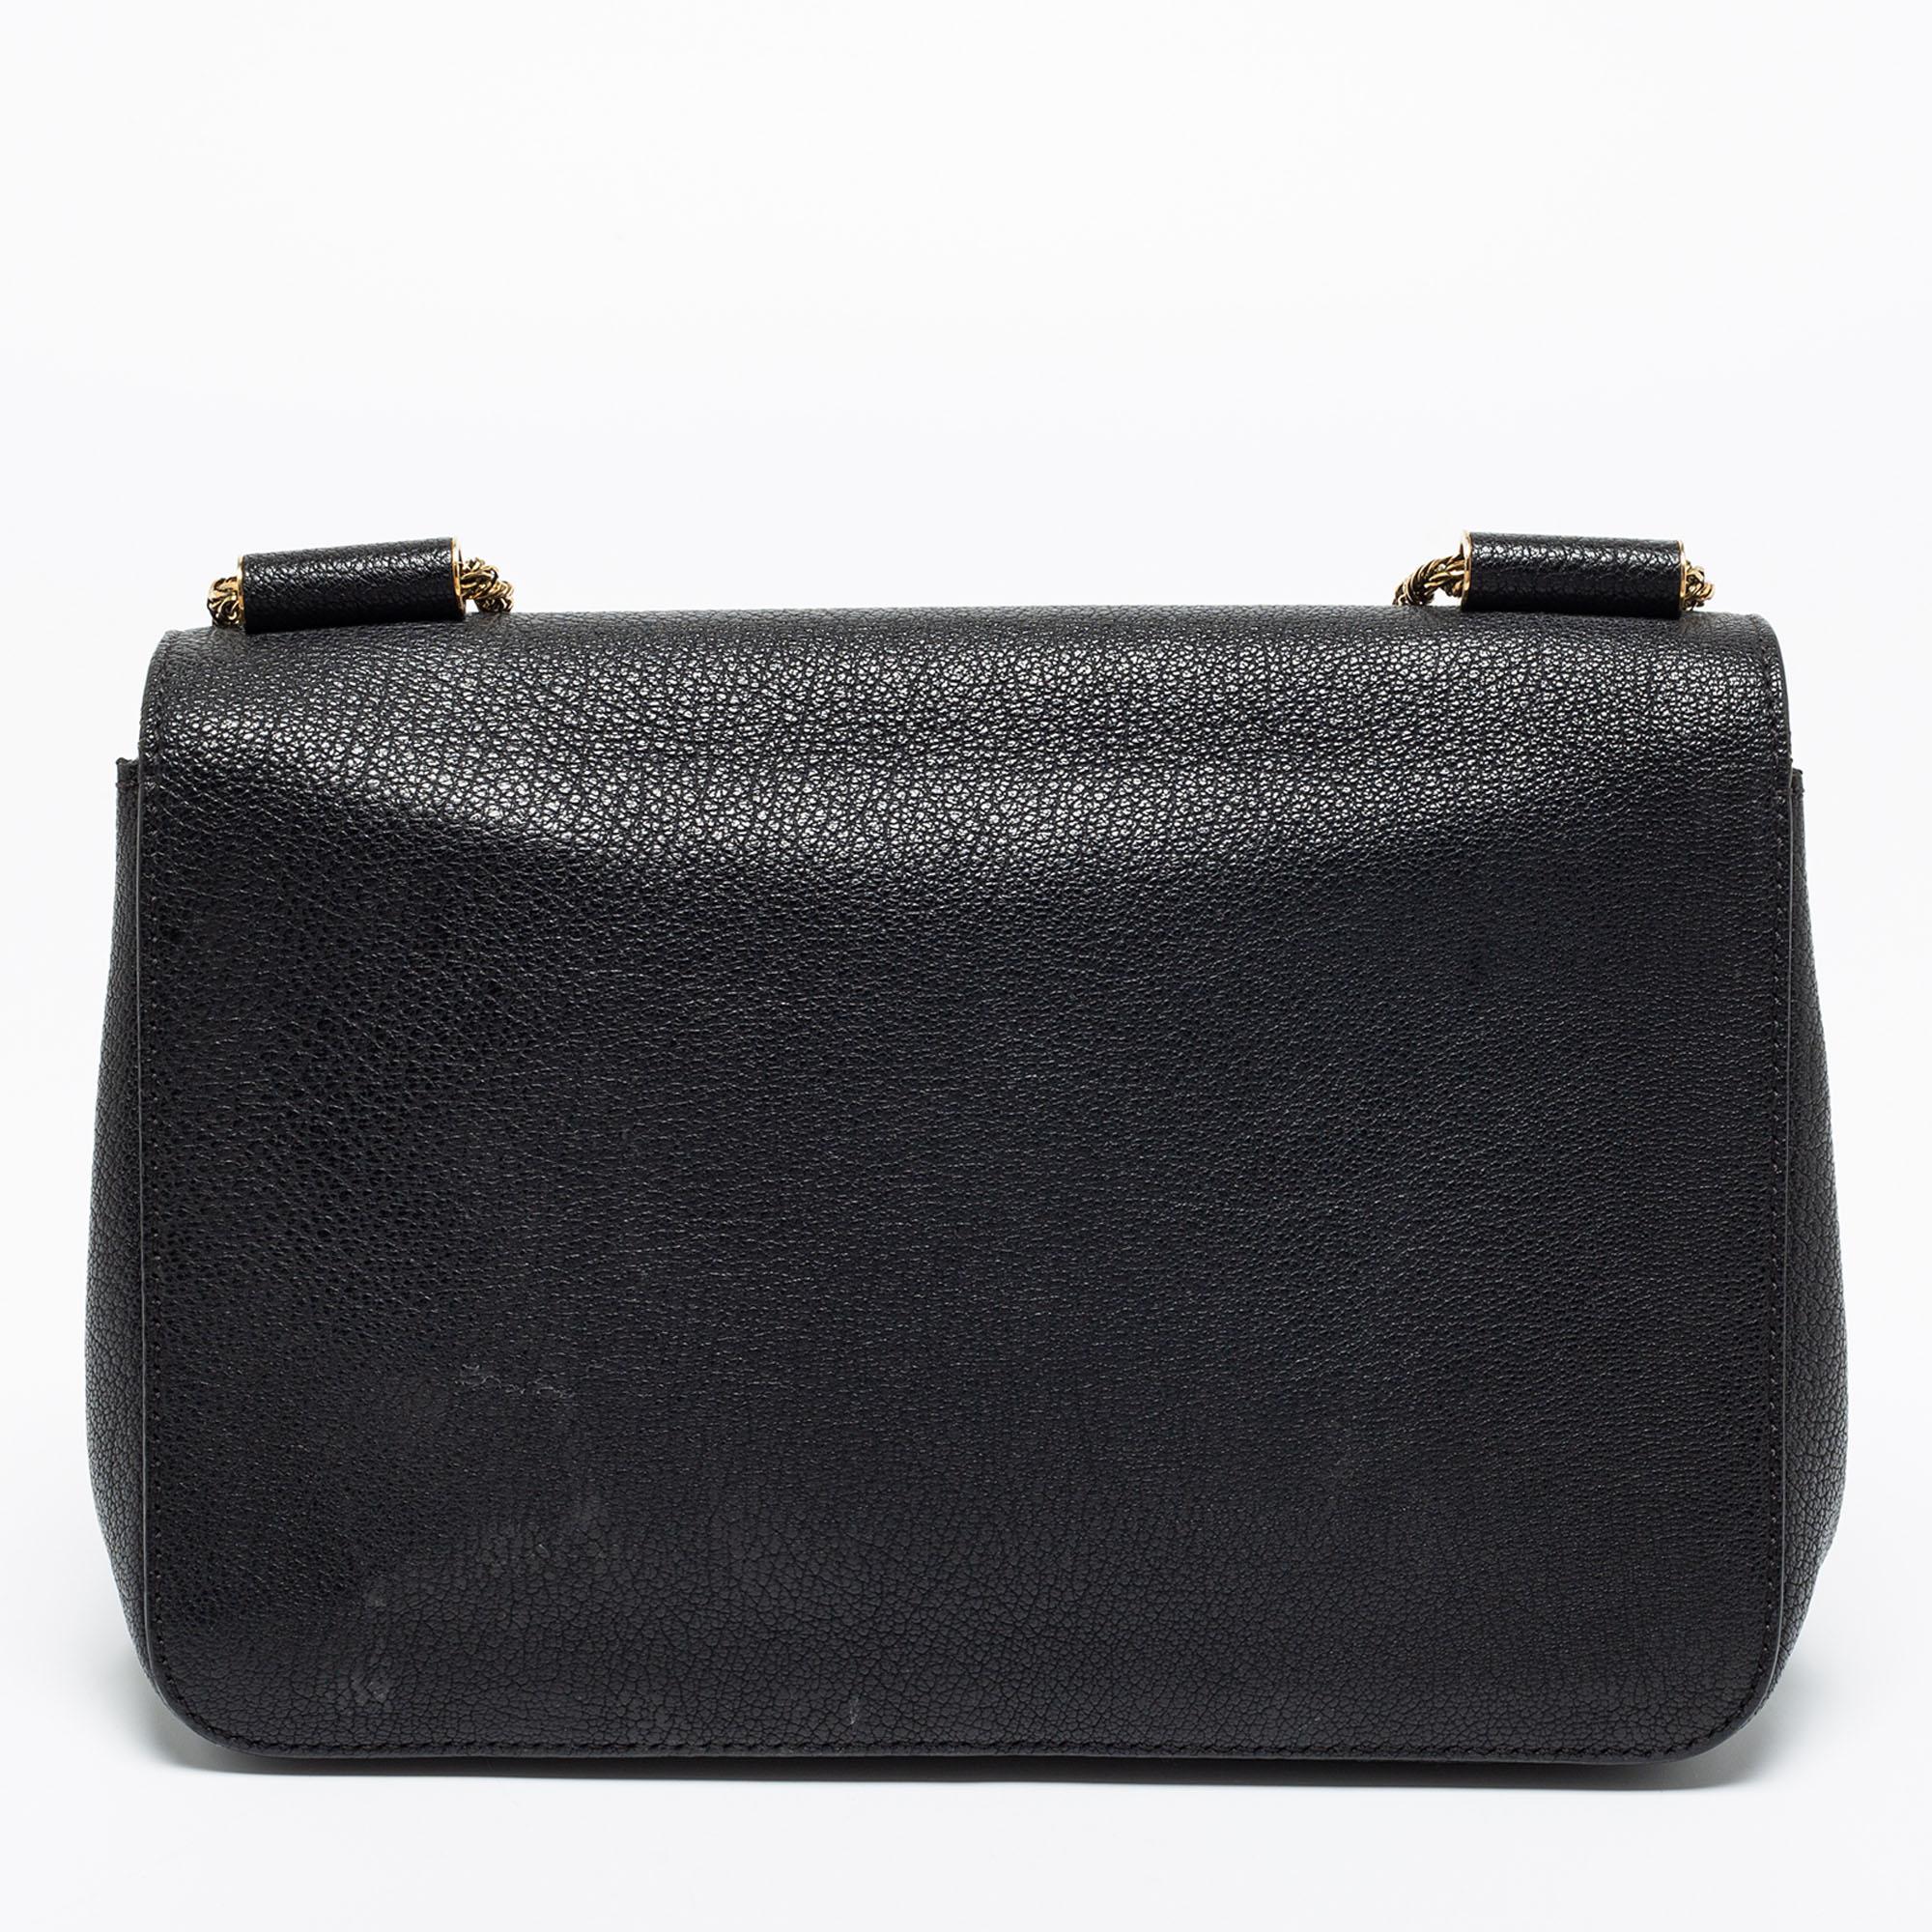 This grand Chloe Elsie bag has been crafted from black leather and styled with a flap. The bag is secured by a turn-lock and completed with a sliding chain. The wait for the perfect day bag ends with this one.
